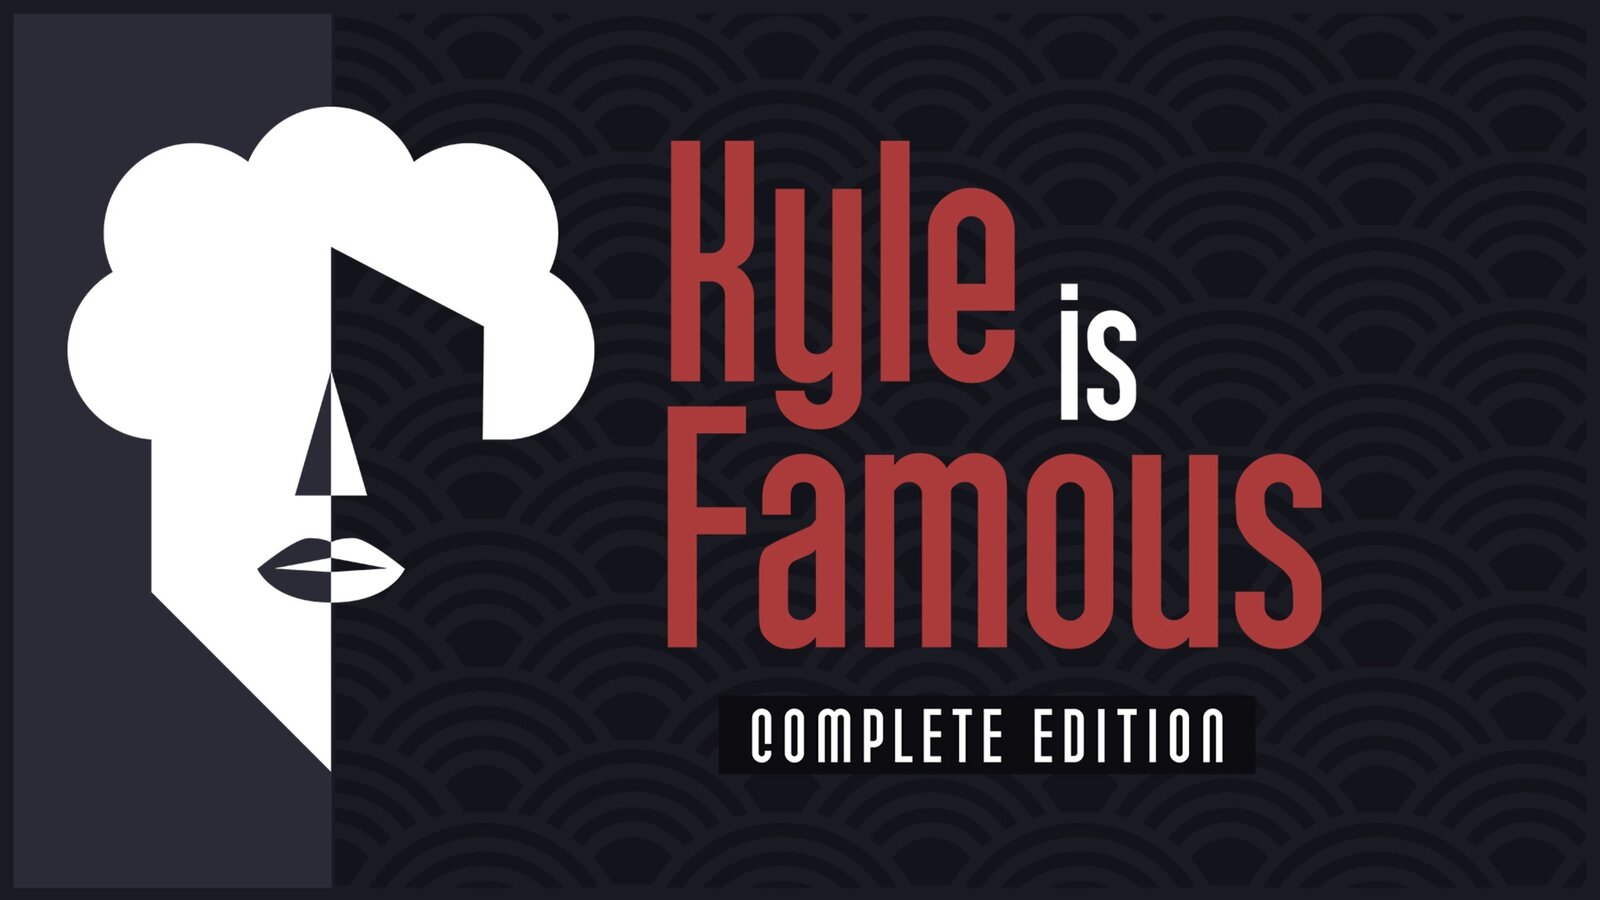 Kyle is Famous - Complete Edition